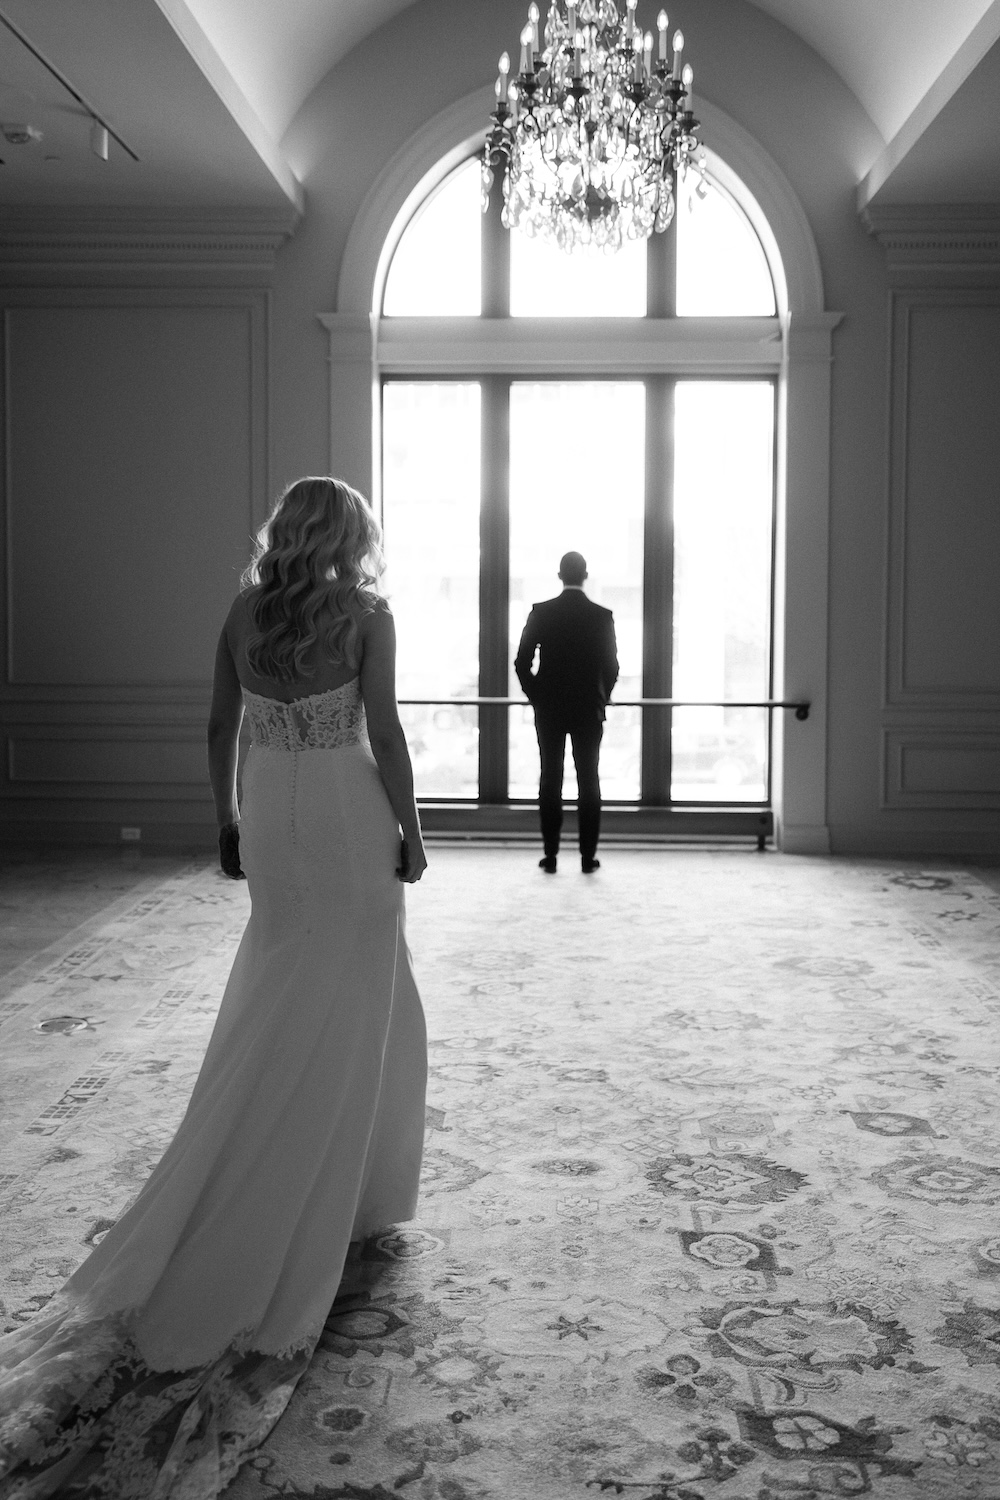 Bride walking up to groom for first look reveal. Modern Washington DC wedding at National Museum of Women in the Arts. Sarah Bradshaw Photography.